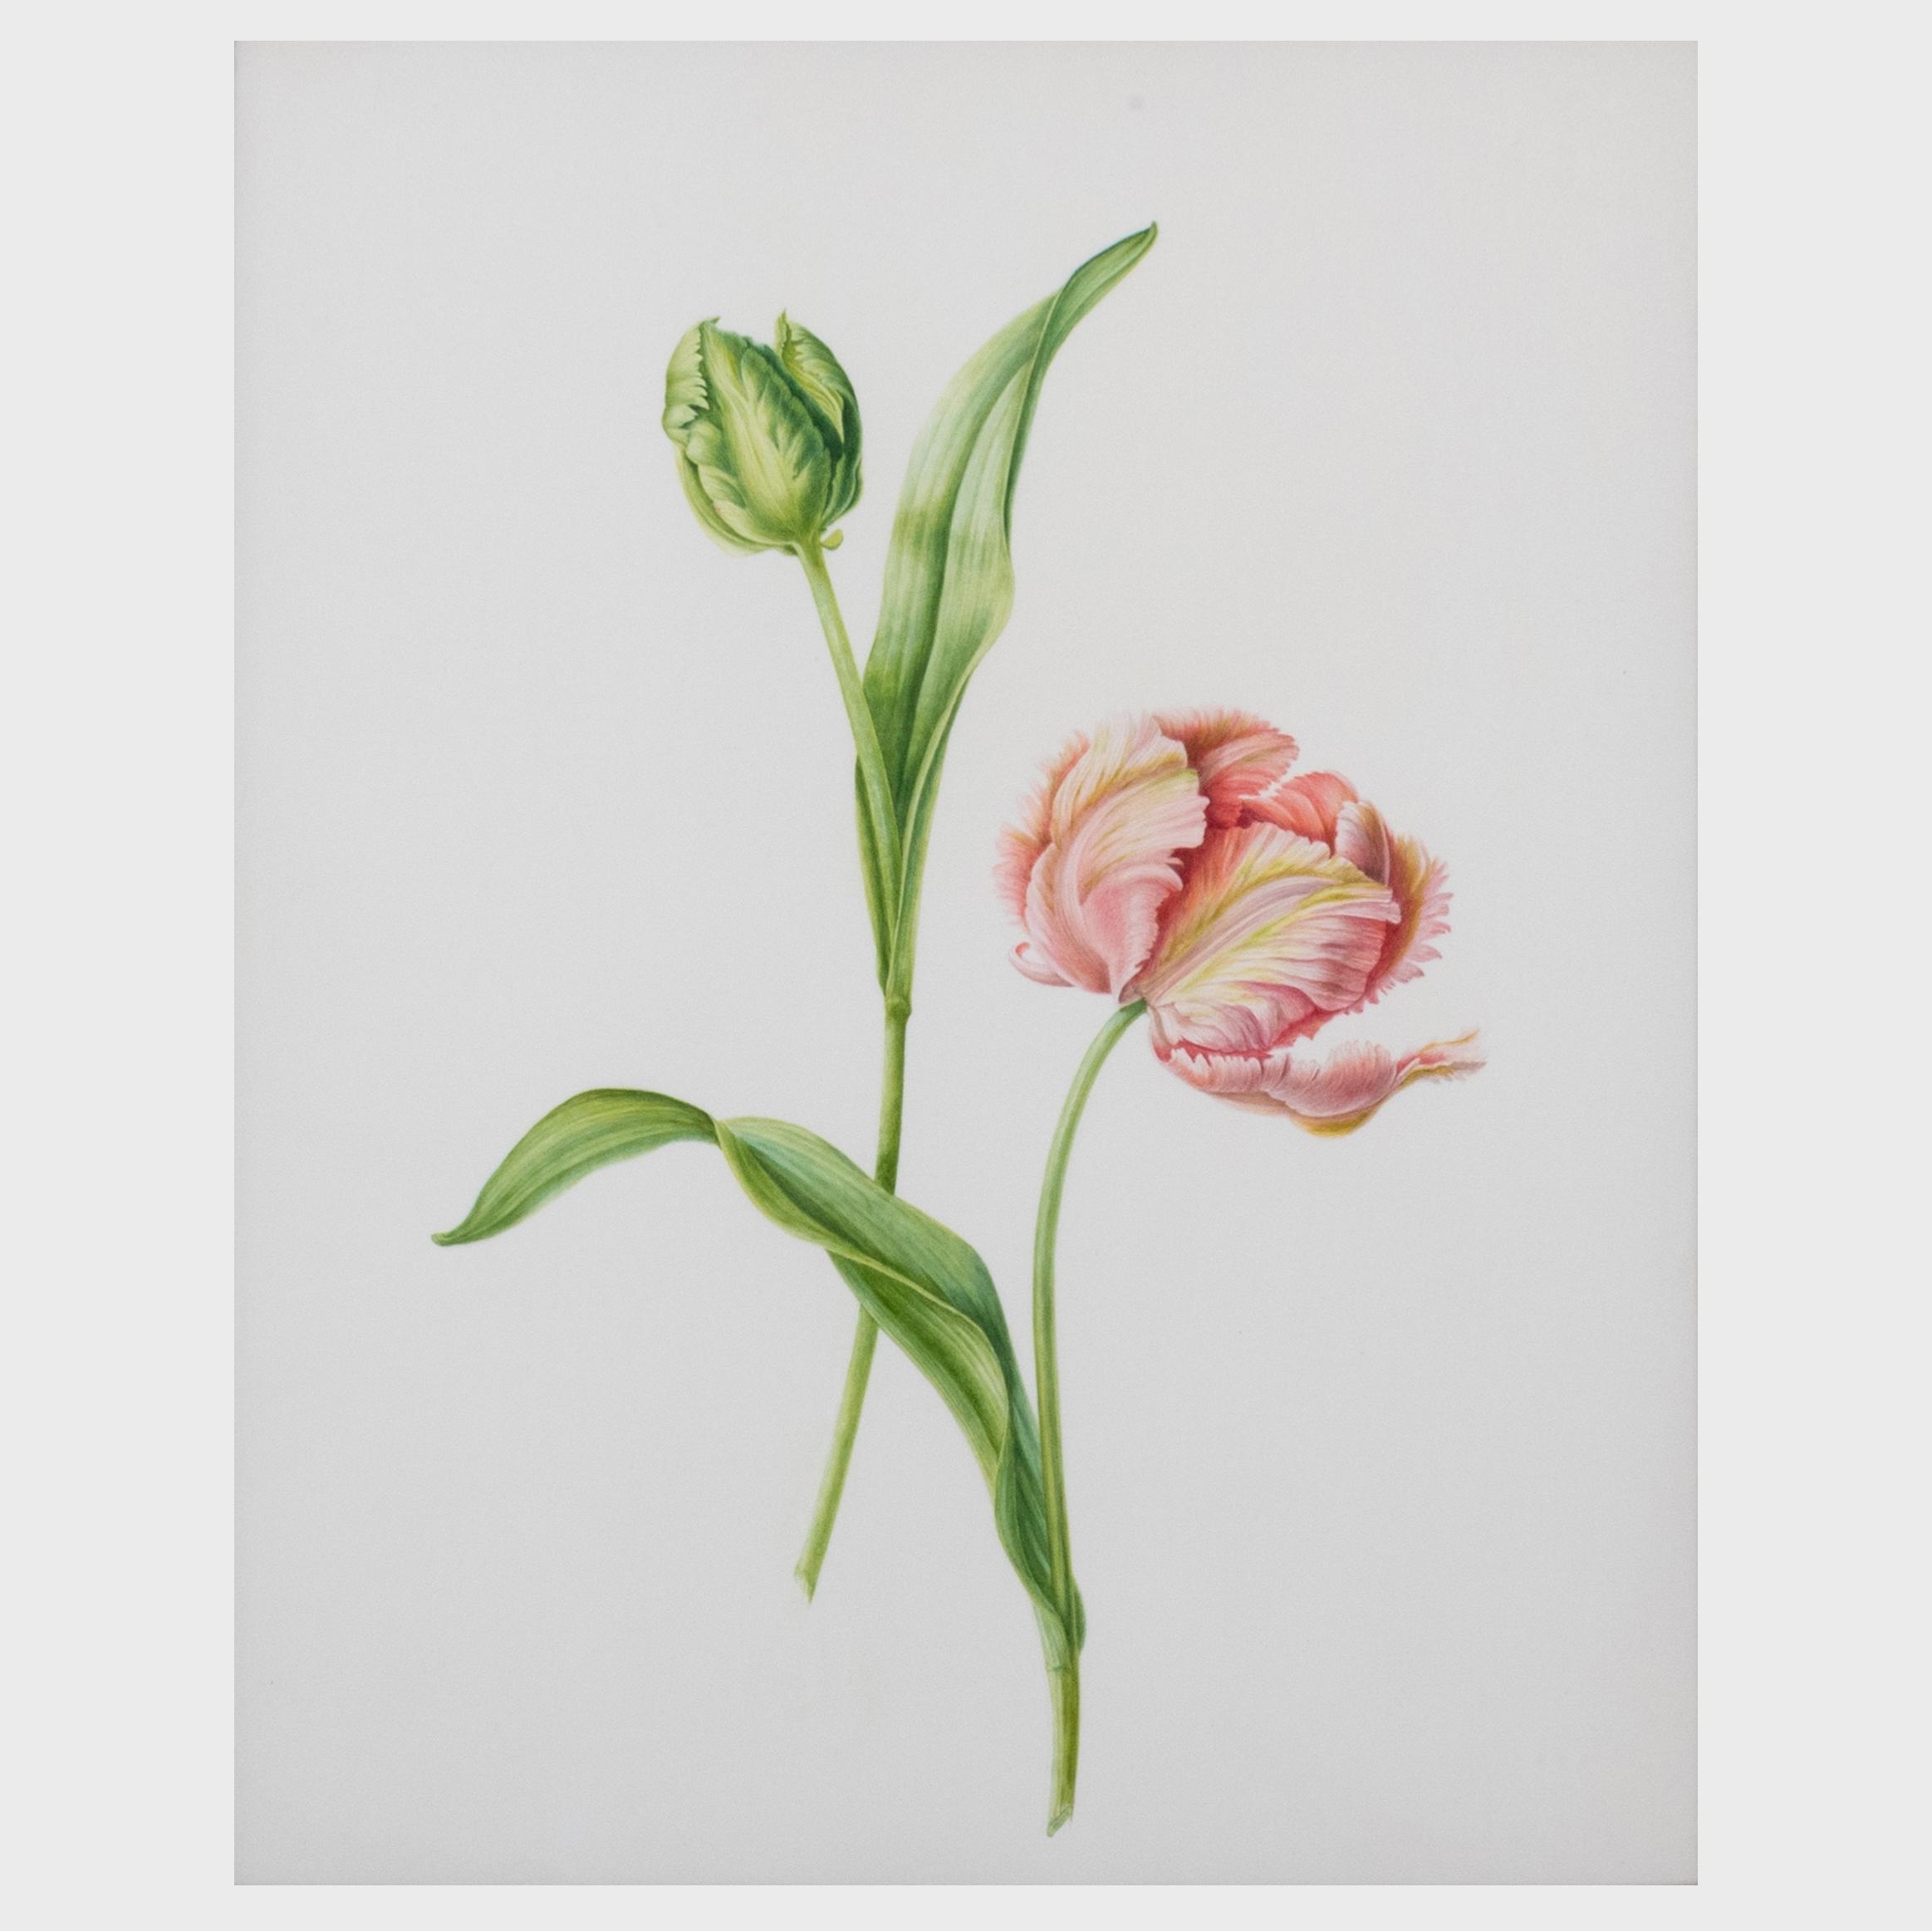 Artwork by Brigid Edwards, Parrot Tulip 'Fantasy' ; Hellebore ; and Slipper Orchid, Made of watercolor and pencil on vellum